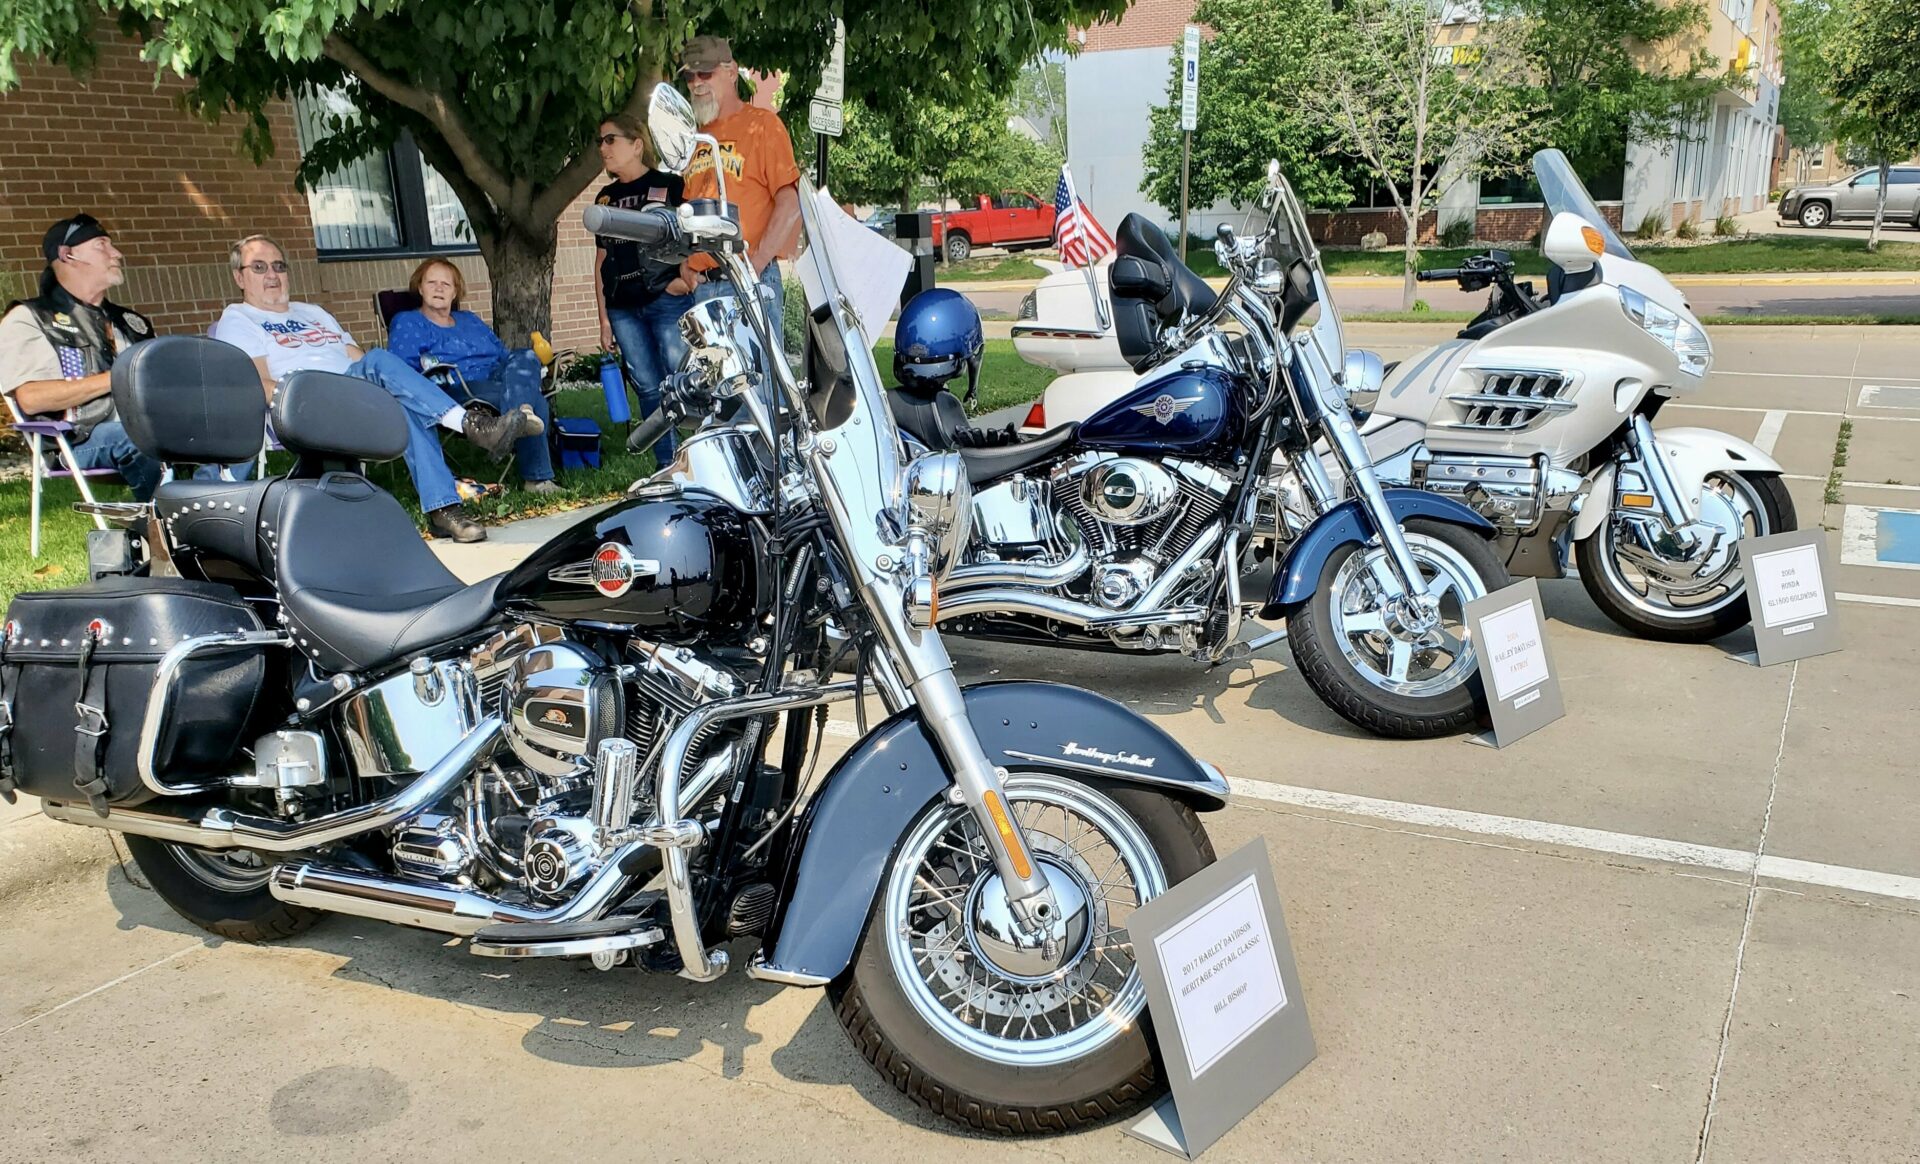 A variety of vehicles was on display at a classic car and bike show on Sunday, June 25 in a parking lot near Aldersgate Church. Aberdeen Insider photo by Annie Scott